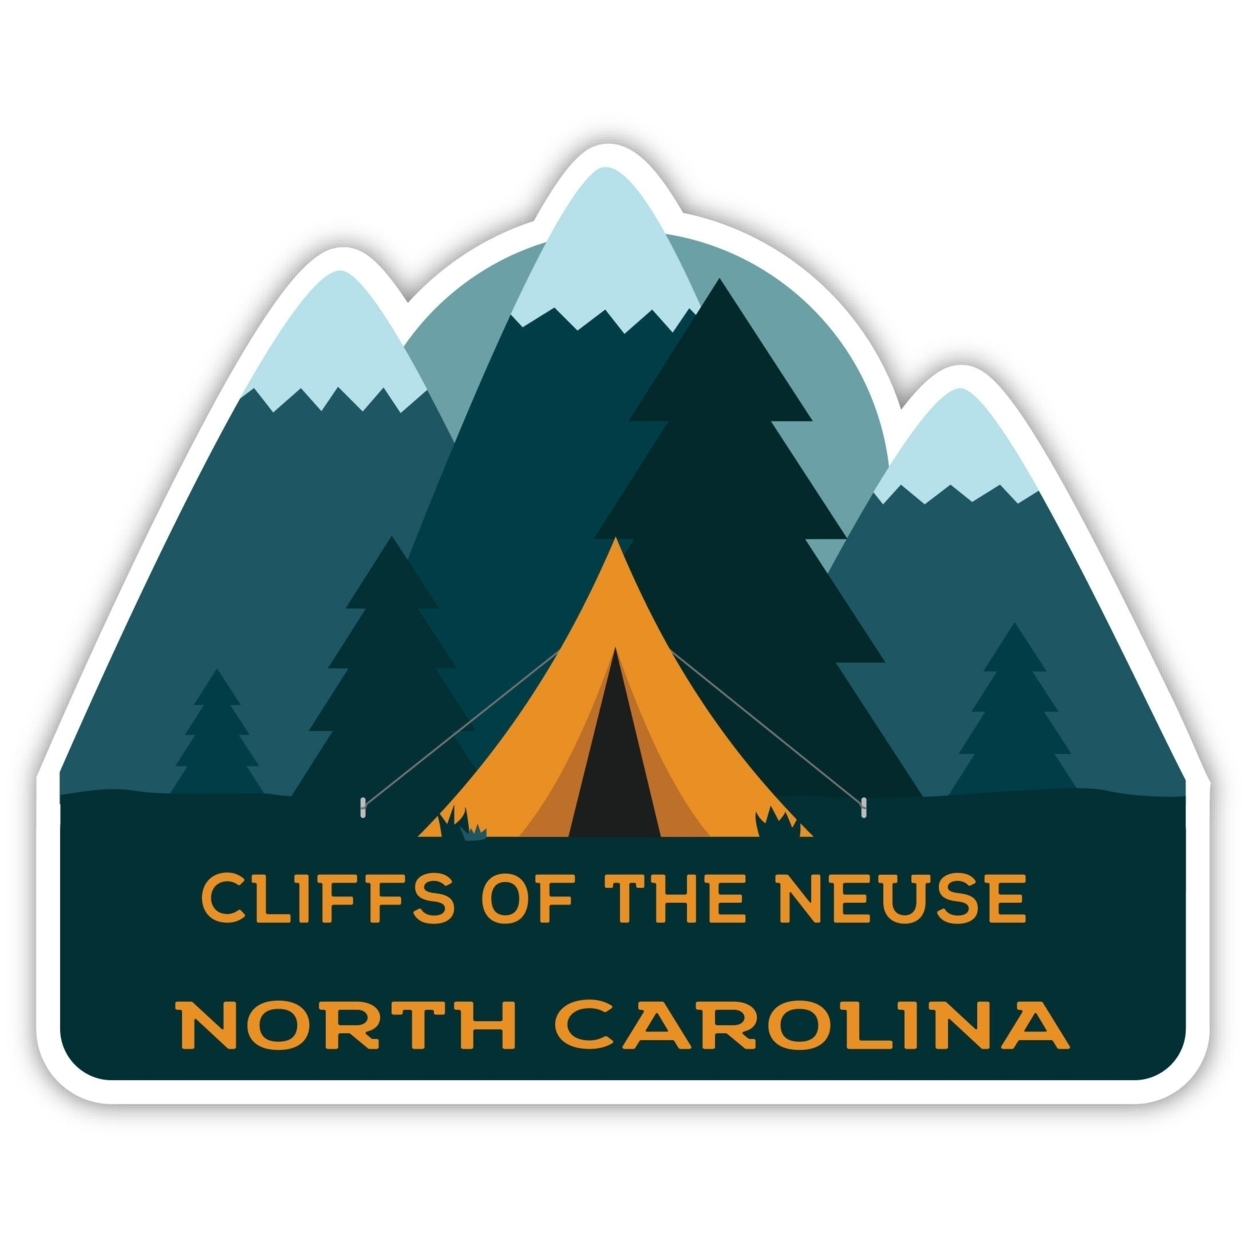 Cliffs Of The Neuse North Carolina Souvenir Decorative Stickers (Choose Theme And Size) - 4-Pack, 10-Inch, Tent